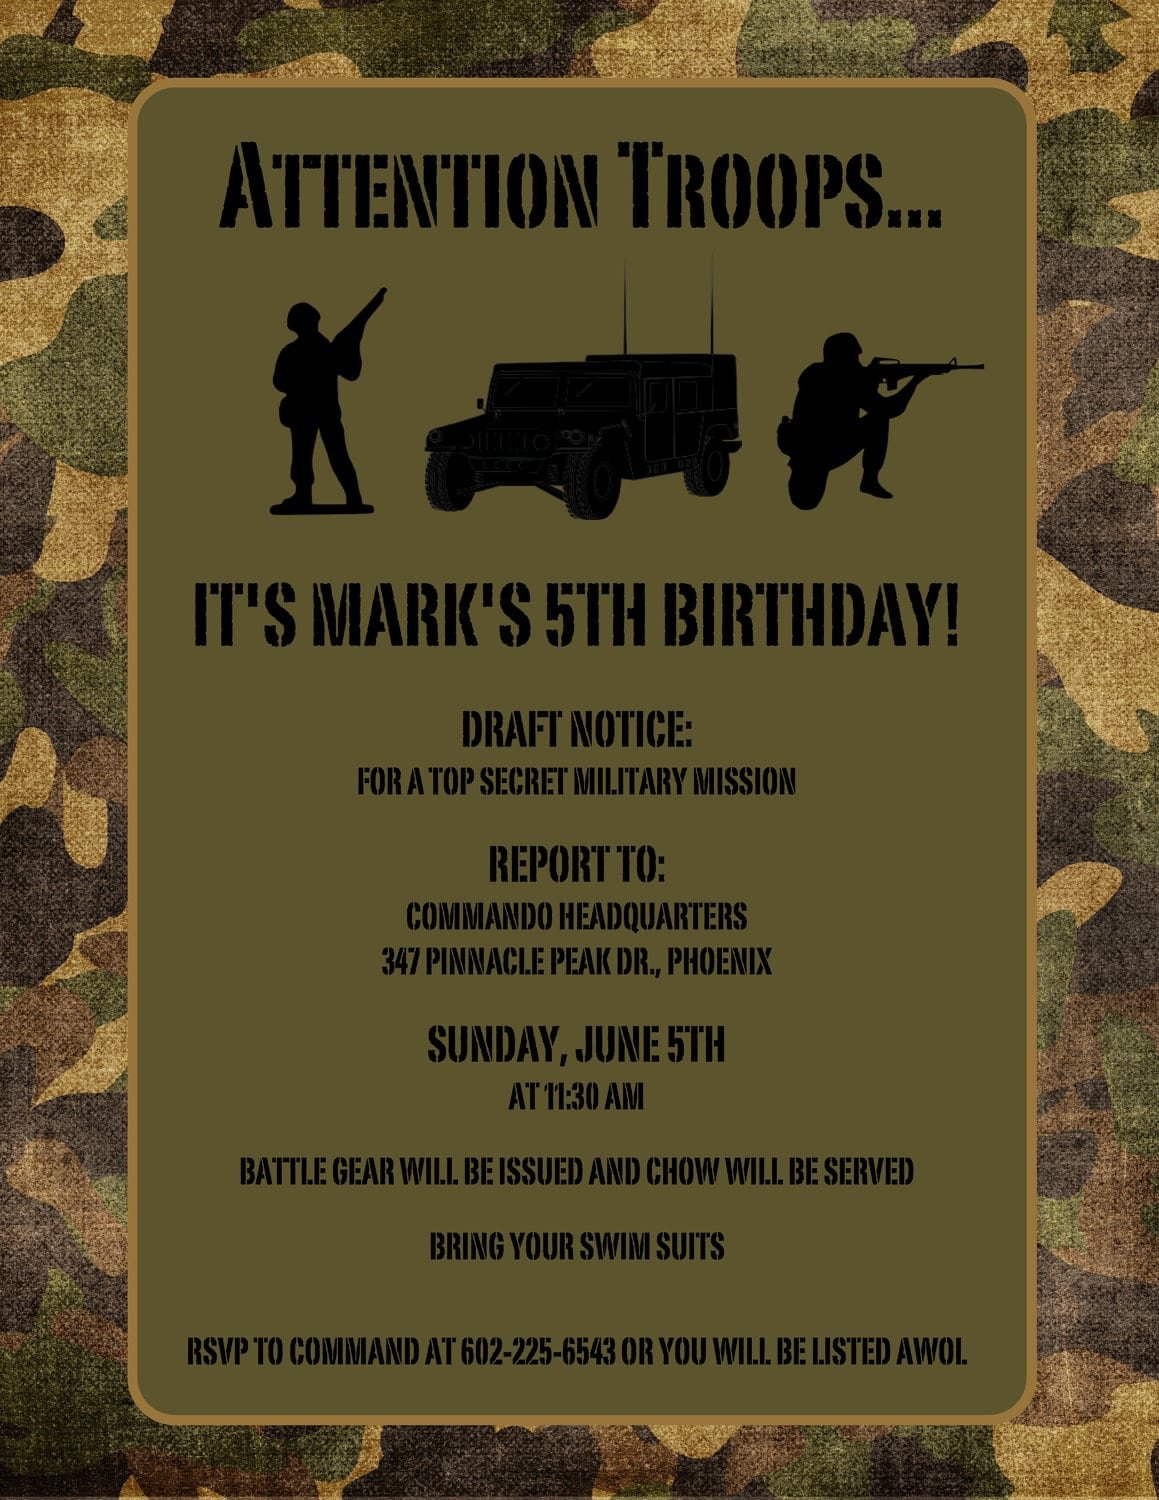 get-camo-birthday-invitations-ideas-camouflage-party-camo-party-nerf